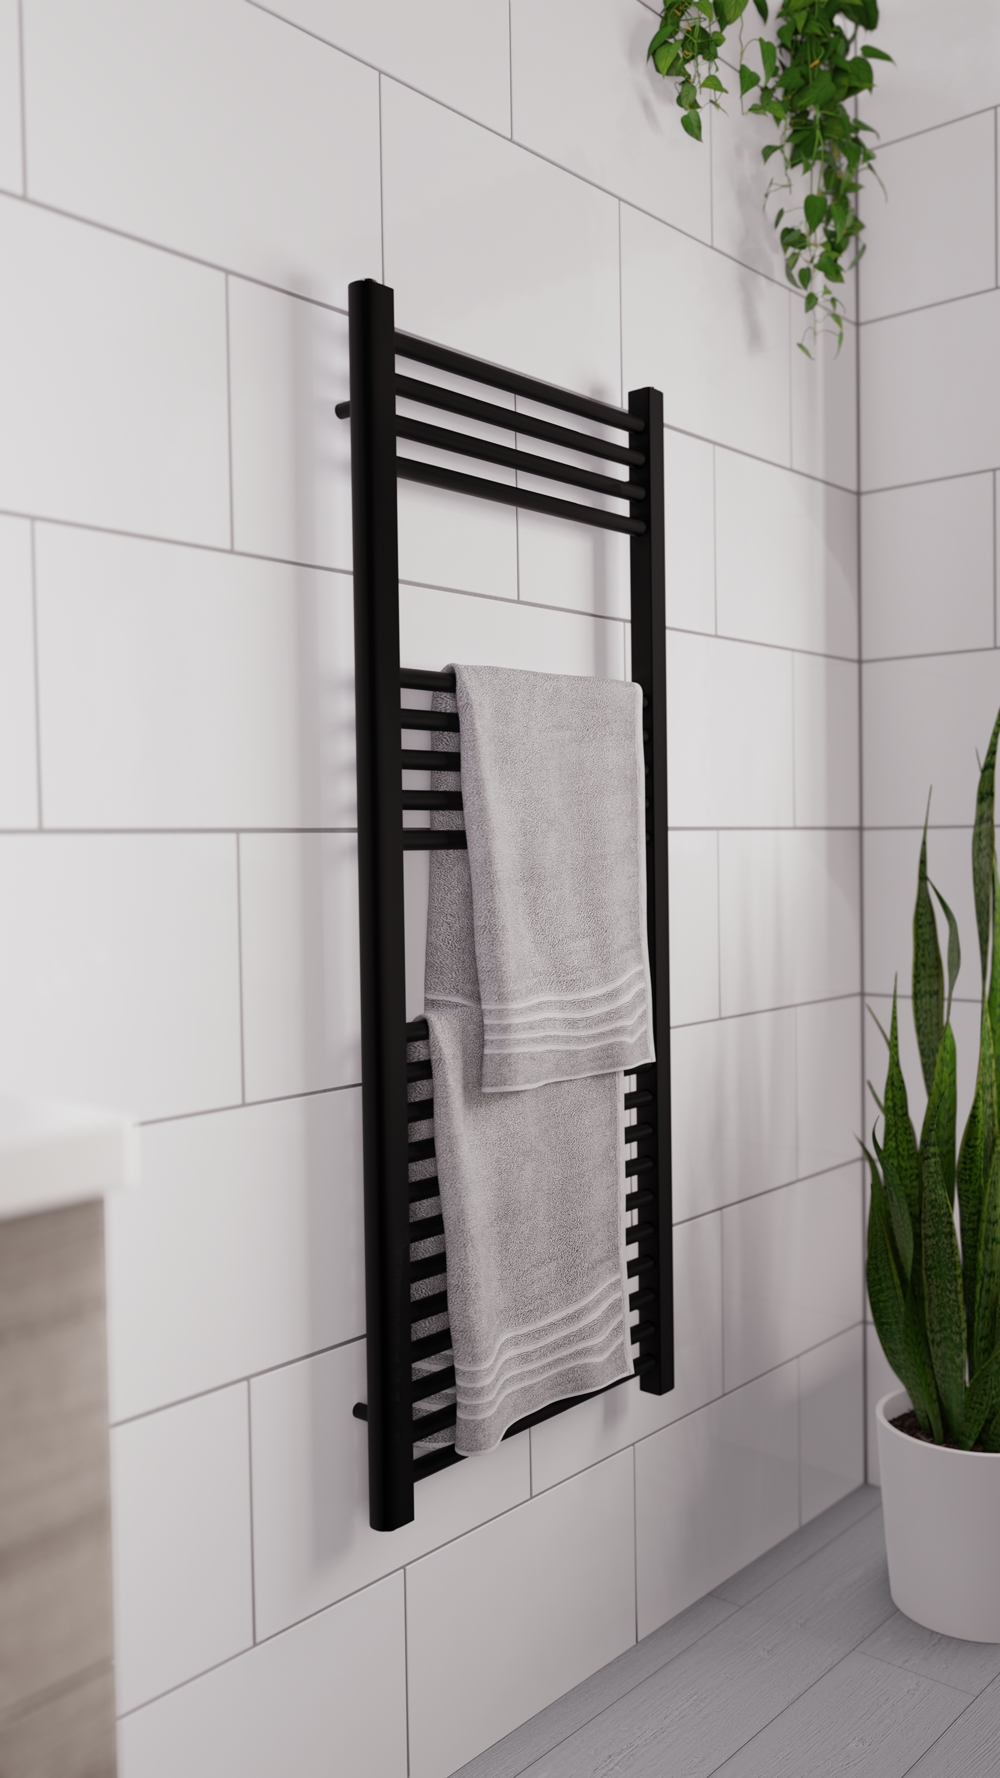 Black heated towel rail with towel hanging on it